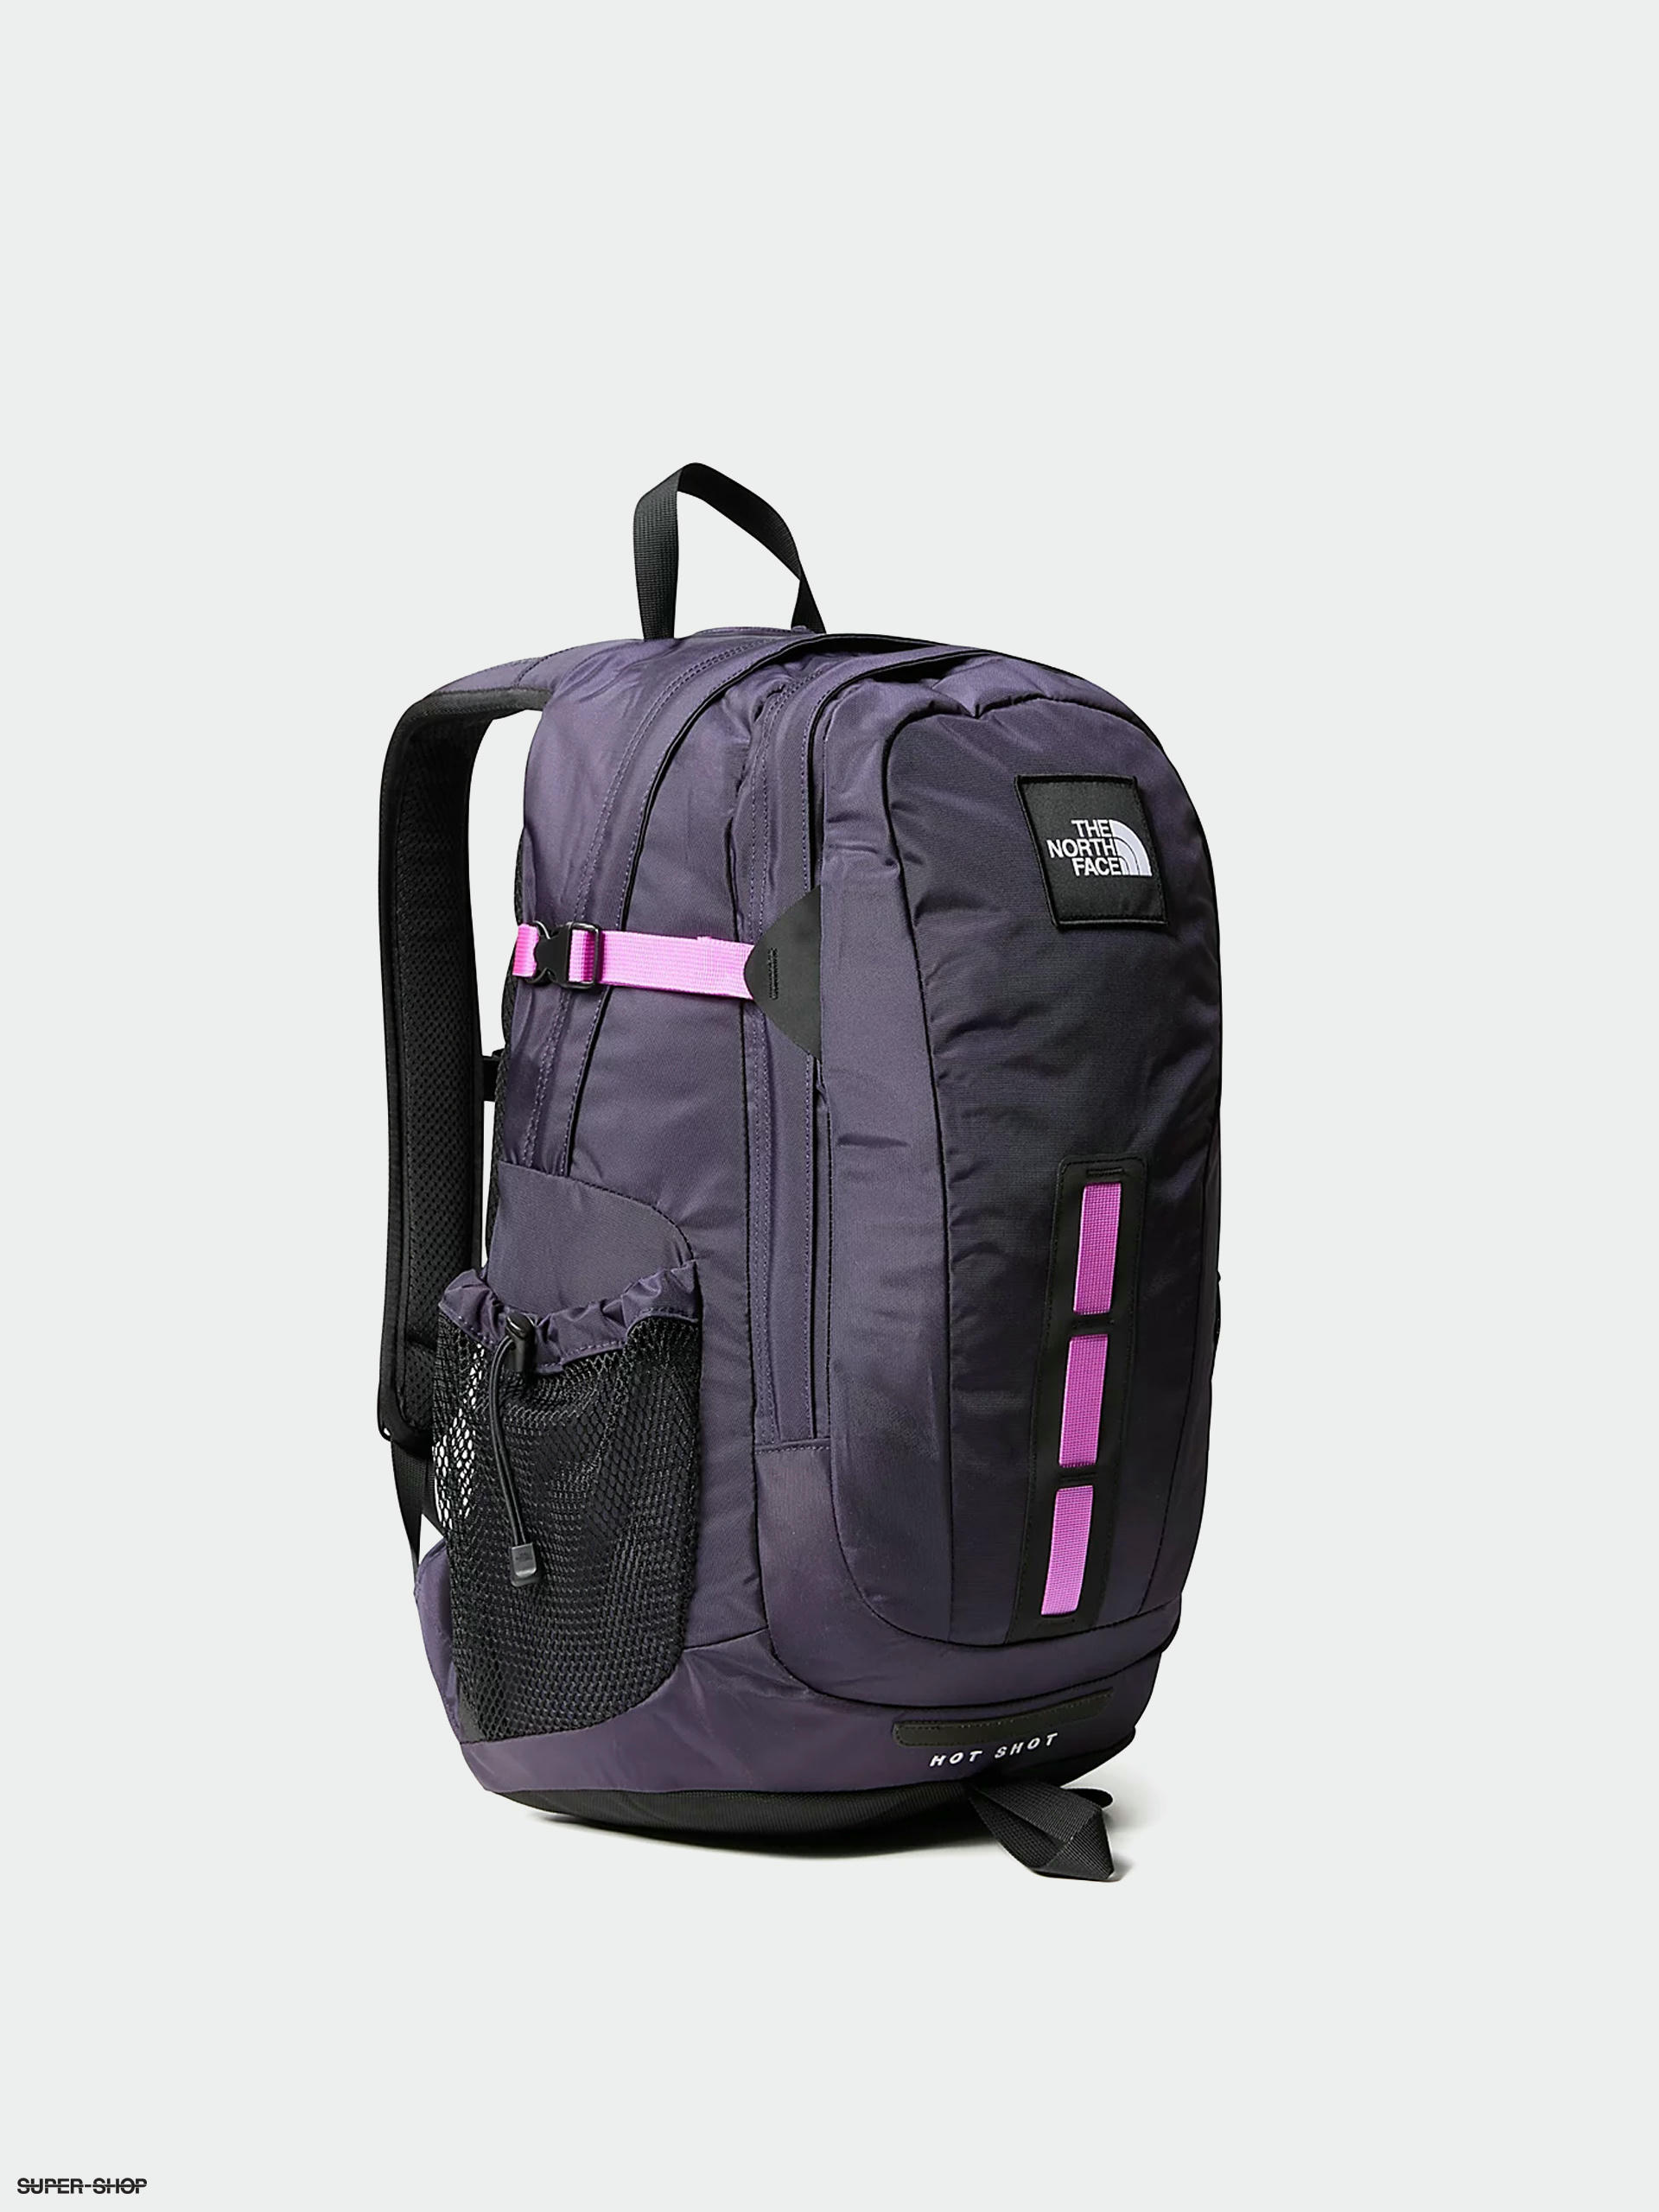 THE NORTH FACE HOT SHOT BACKPACK NM2DN52B OFF_WHITE 28L UNISEX SIZE